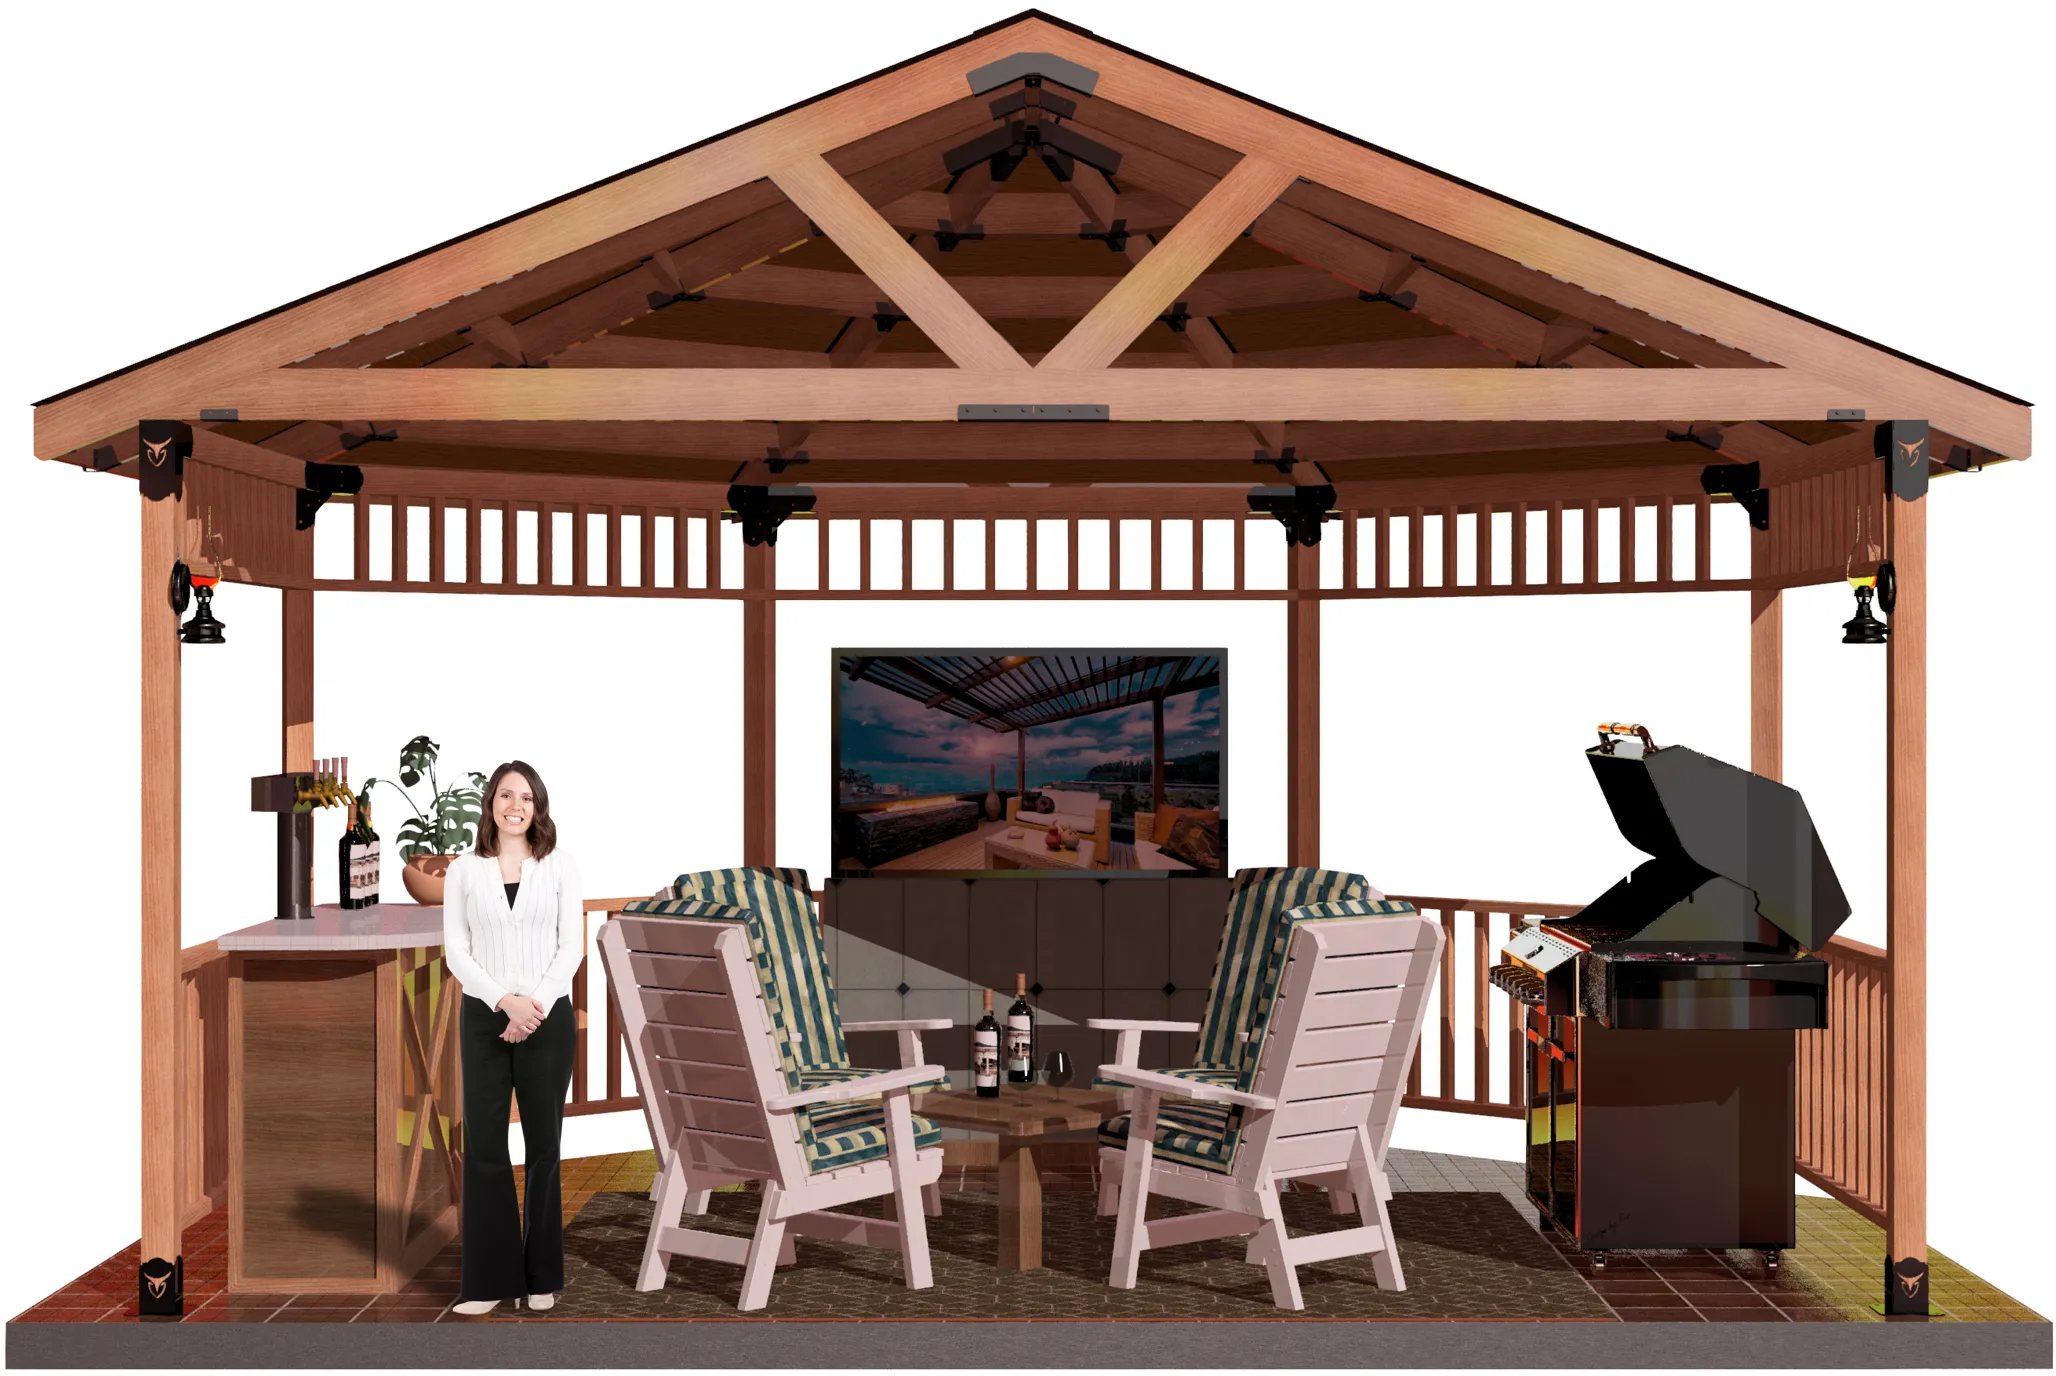 view of a DIY 4x4 solid roofed partial octagon gazebo. A bar with beer taps & wine bottles, barbecuer, LED TV, and casual furniture inside and a smiling girl standing inside it.